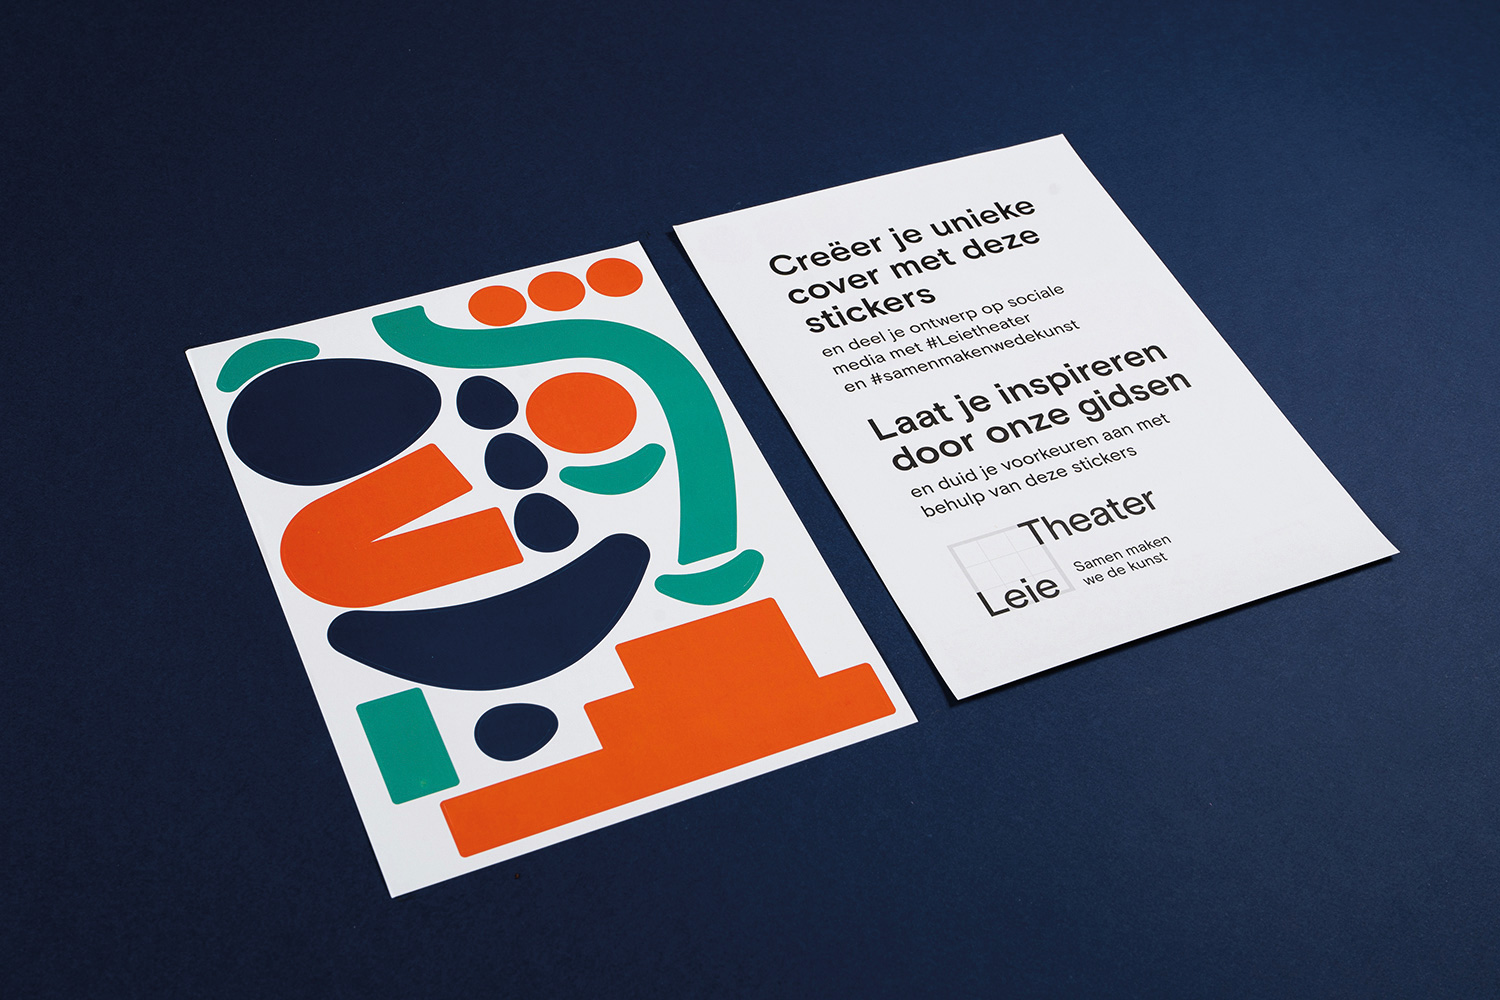 New Logo and Identity for Leietheater by DIFT